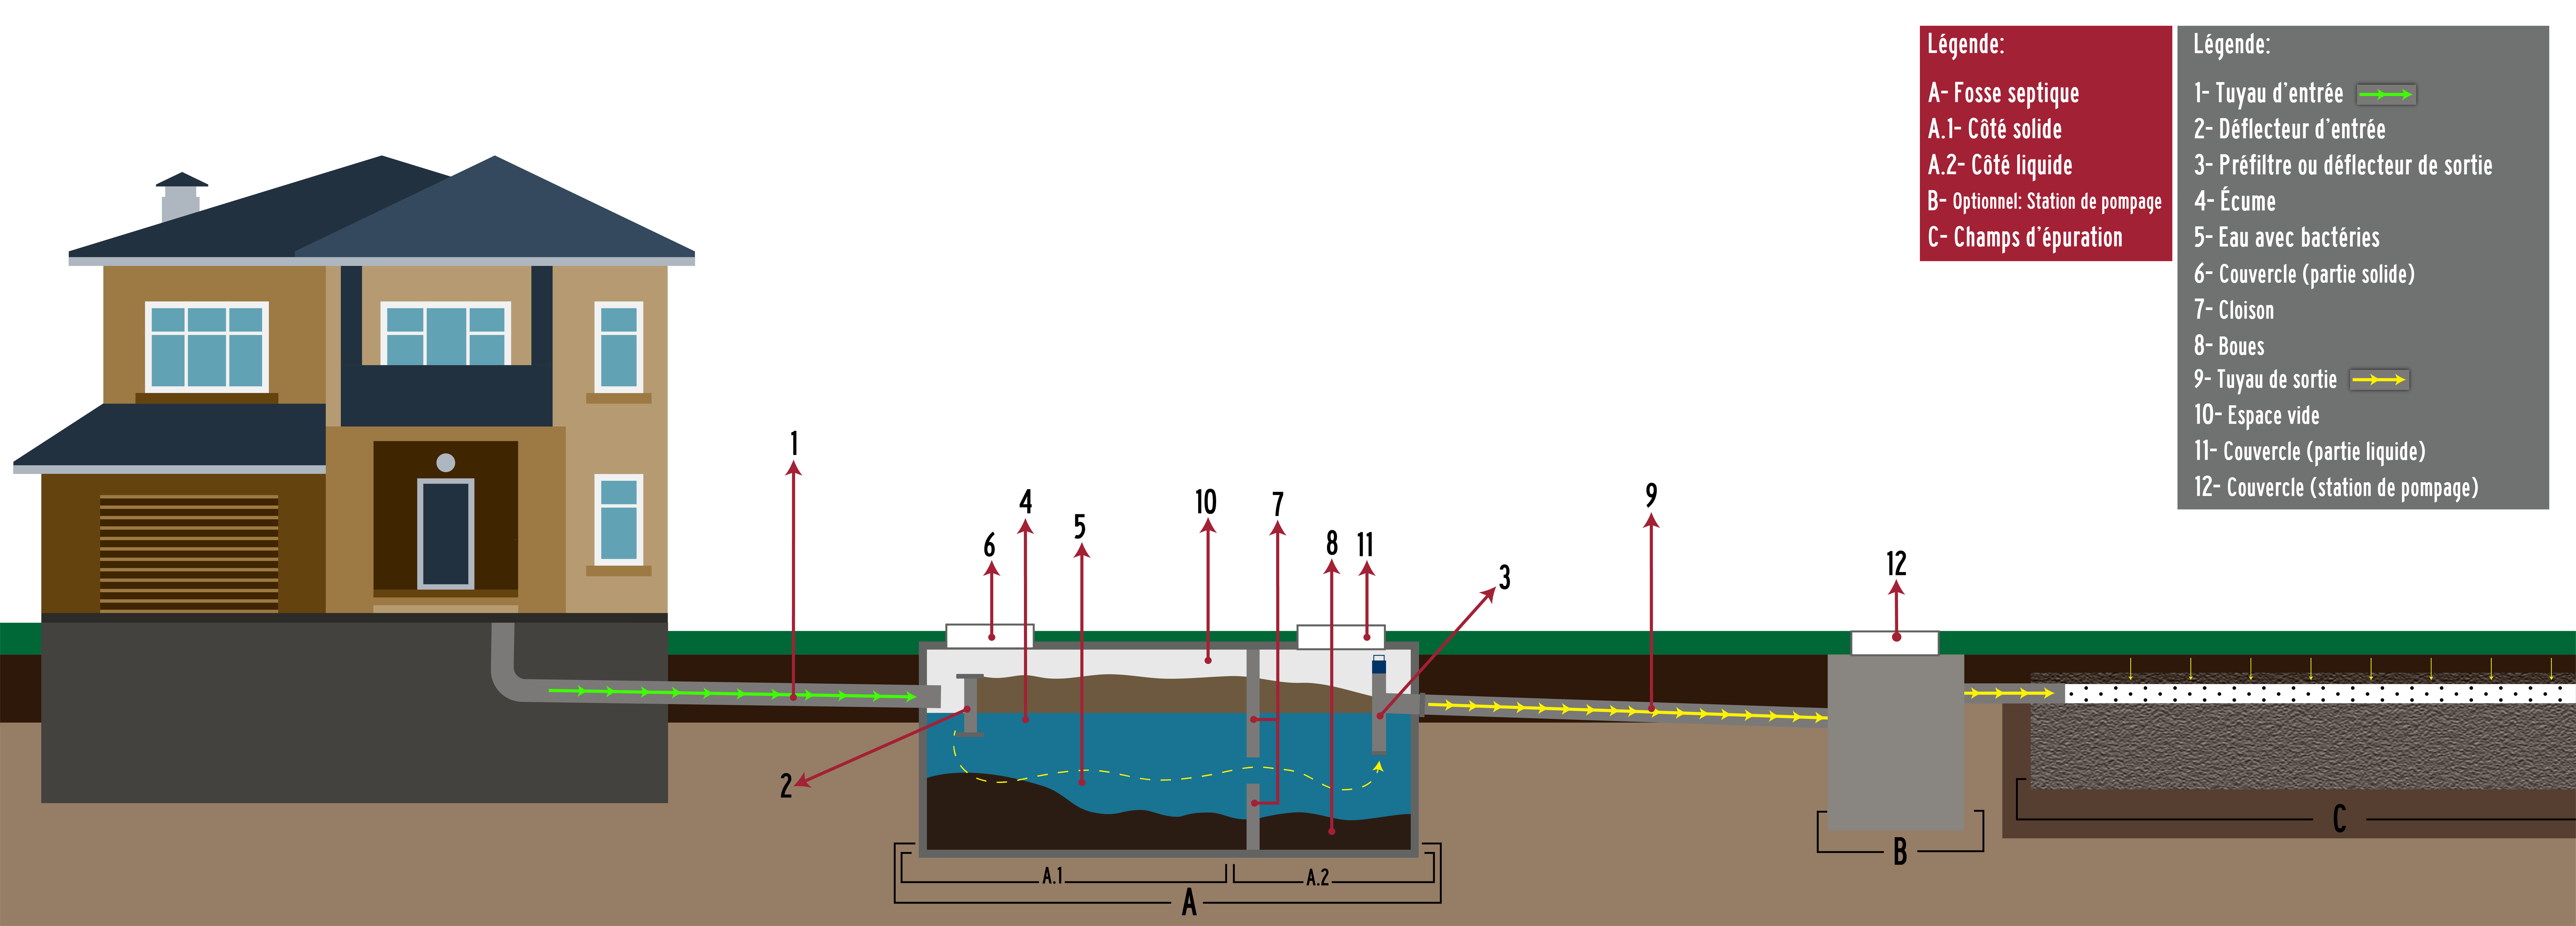 How Does A Septic Tank Work - Sanivac